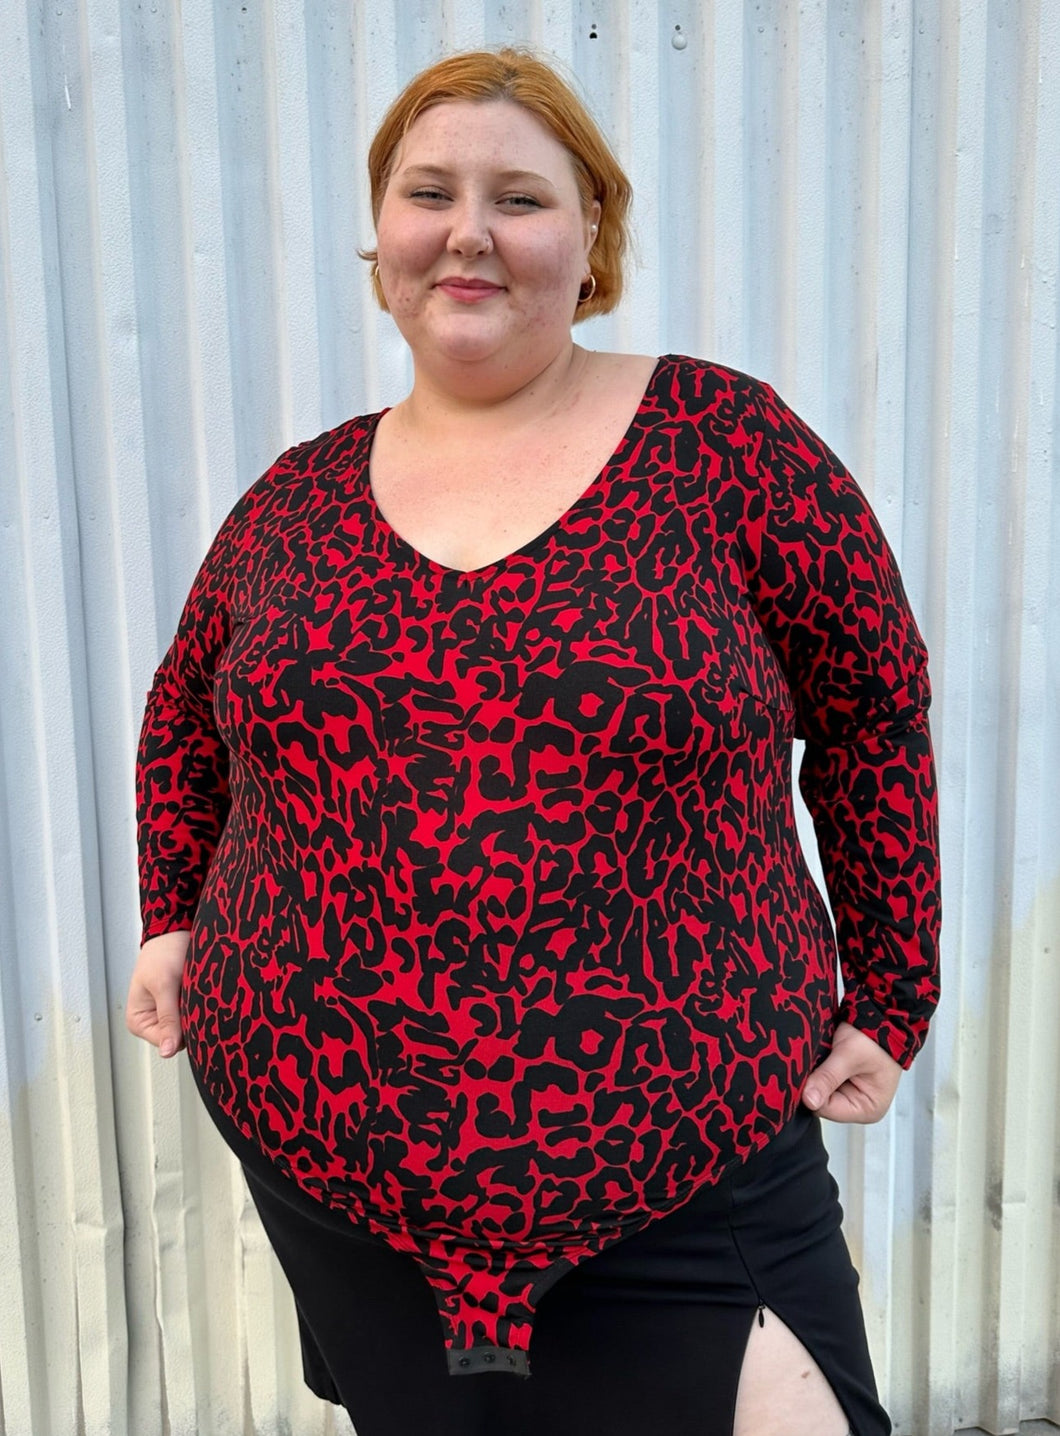 Front view of a size 22/24 Eloquii black and red leopard pattern long sleeve bodysuit on a size 22/24 model. The photo is taken outside in natural lighting.